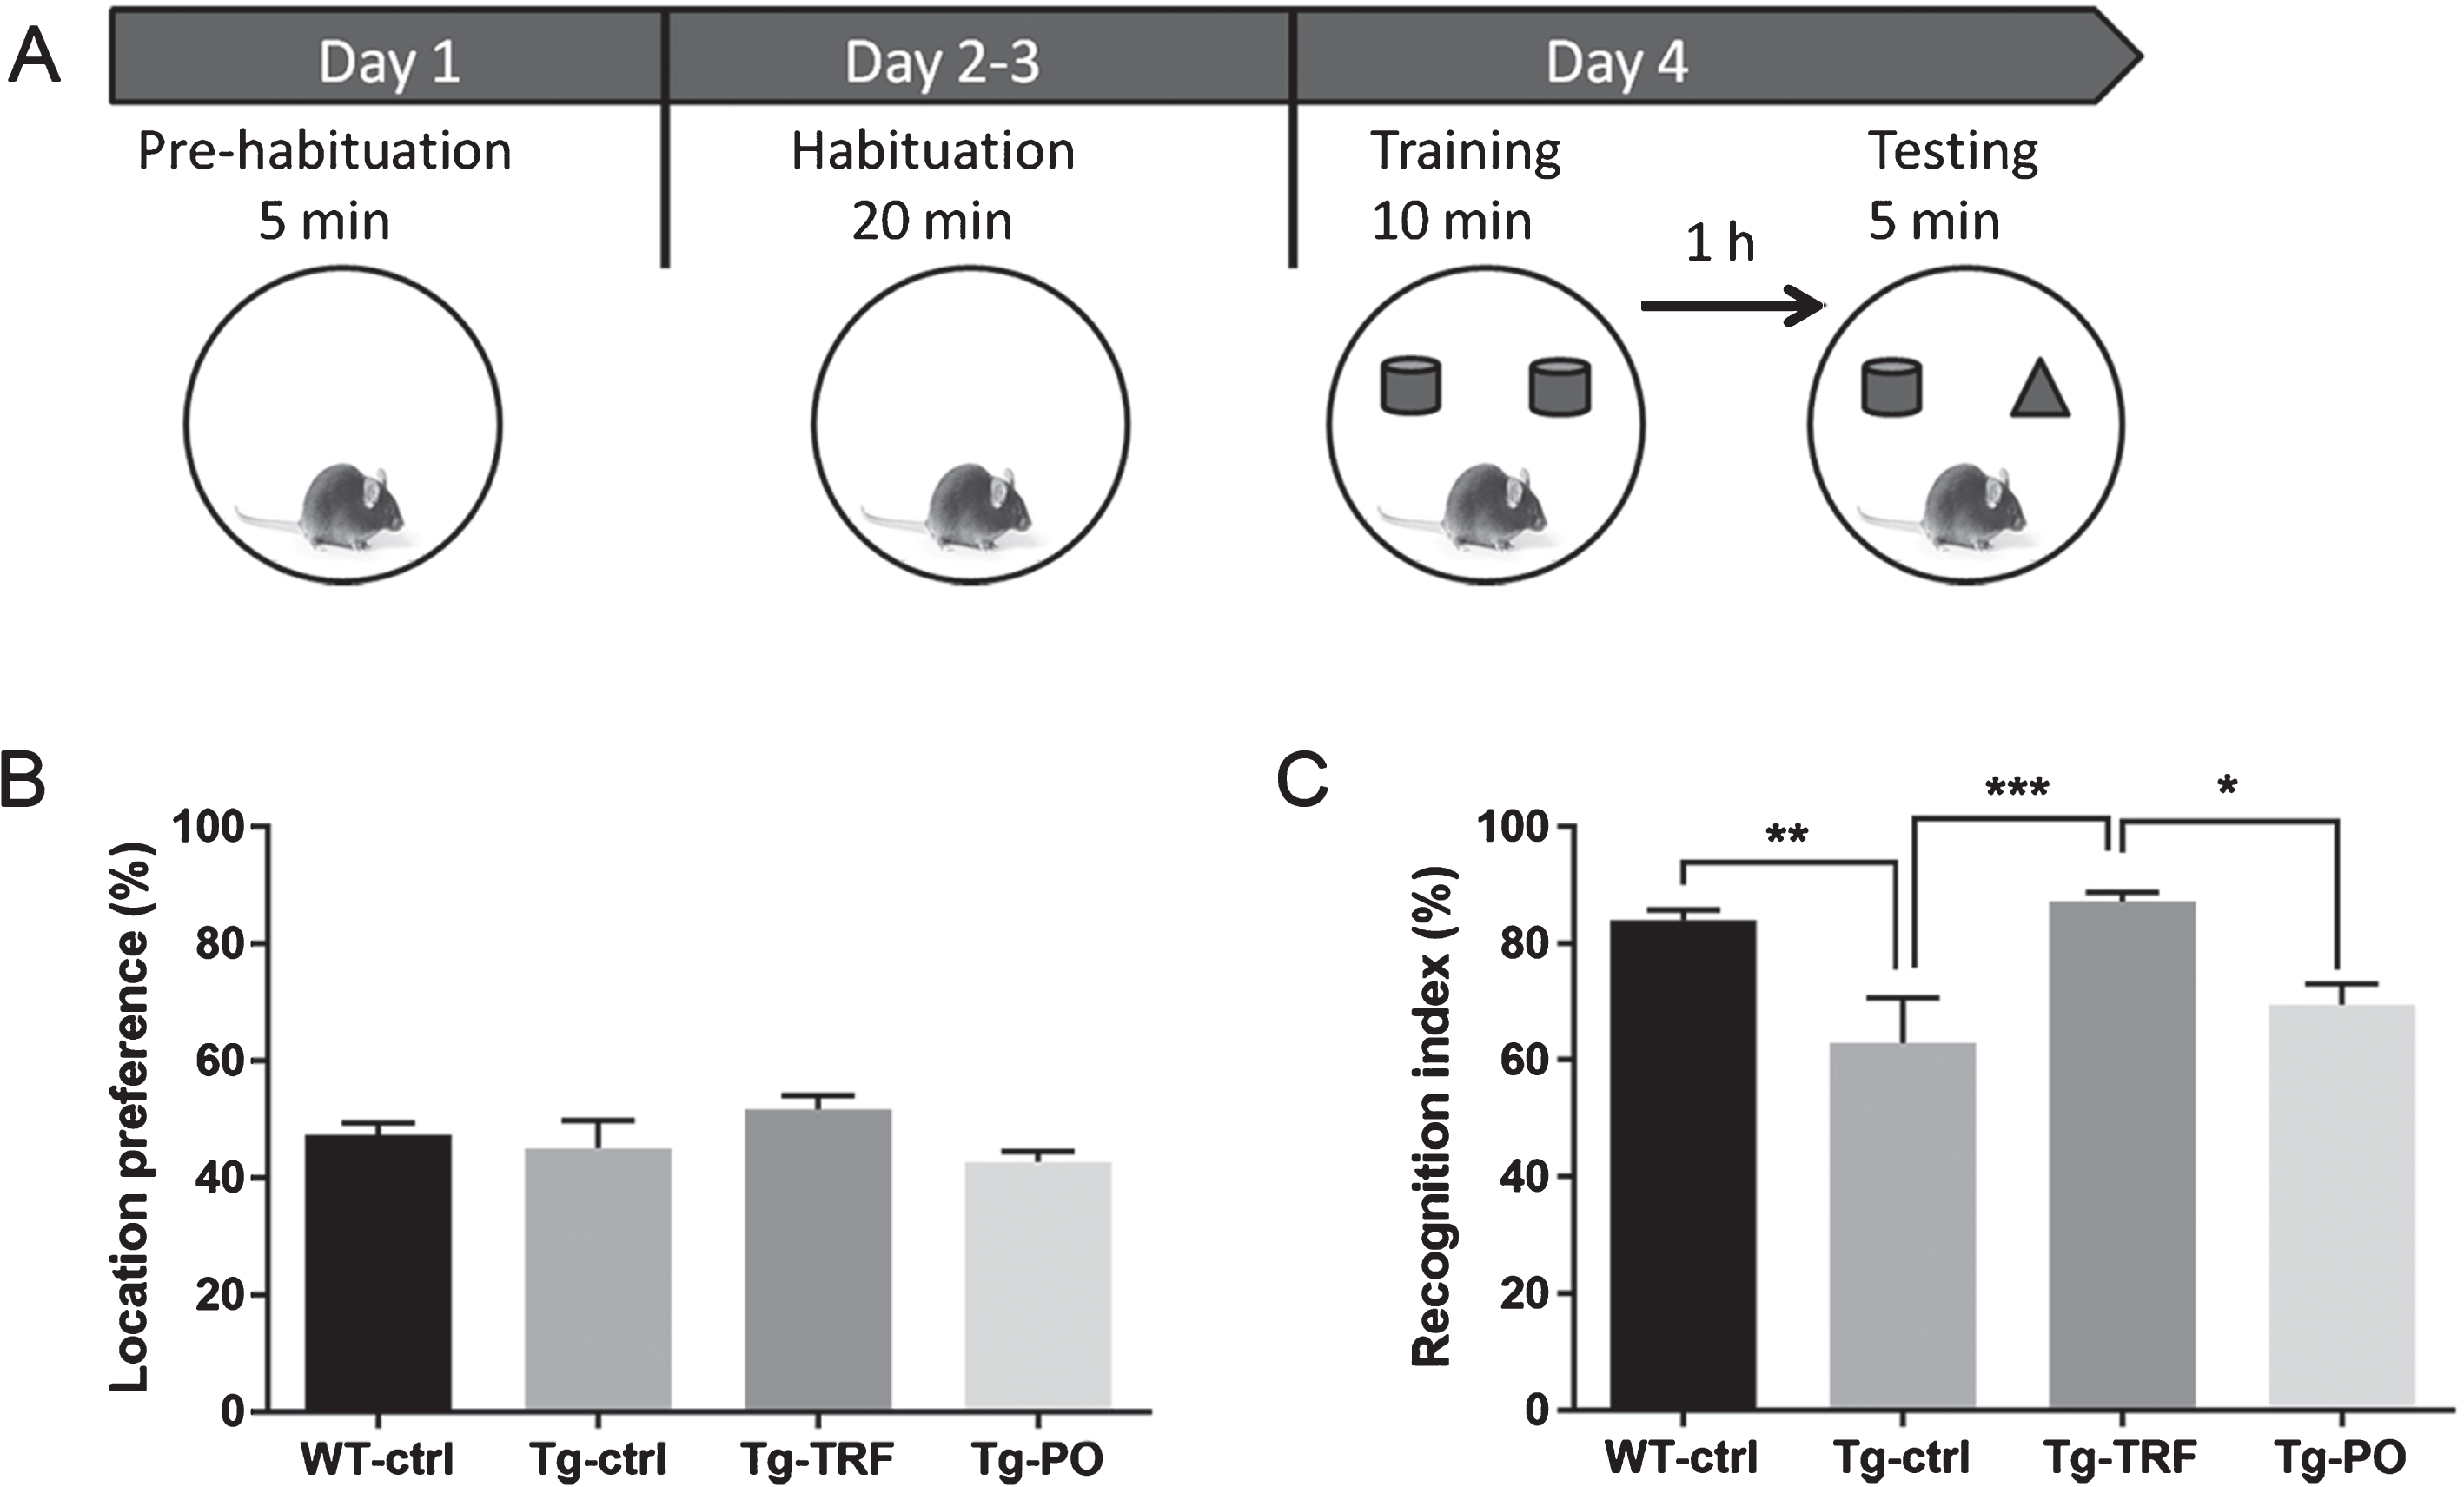 Administration with tocotrienol-rich fraction (TRF) prevents working memory deficit in AβPP/PS1 mice as measured by the novel object recognition task. A) Schematic representation of the novel object recognition test. Following pre-habituation and habituation in the empty arena, mice were allowed to explore an identical pair of objects placed in the arena for 10 min as the training session. After a 1 h stay in the home cage, the mice were returned to the arena where two objects, one familiar and one novel, were placed in the same locations as in the training session. The time spent exploring the two objects was recorded. B) All groups spent approximately equal time exploring the two identical objects during the training trial, indicating no inherent place preference. C) Tg-ctrl mice spent significantly less time exploring the novel object compared to WT-ctrl mice as indicated by the lower mean recognition index, while TRF treatment of Tg mice (Tg-TRF group) increased the recognition index to the WT-ctrl level. Data represent mean±S.E.M. [Bonferroni post hoc test after analysis of variance (WT-ctrl, n = 12; Tg-ctrl, n = 8; Tg-TRF; n = 9; Tg-PO, n = 9)]. *p < 0.05, **p < 0.01, ***p < 0.001.